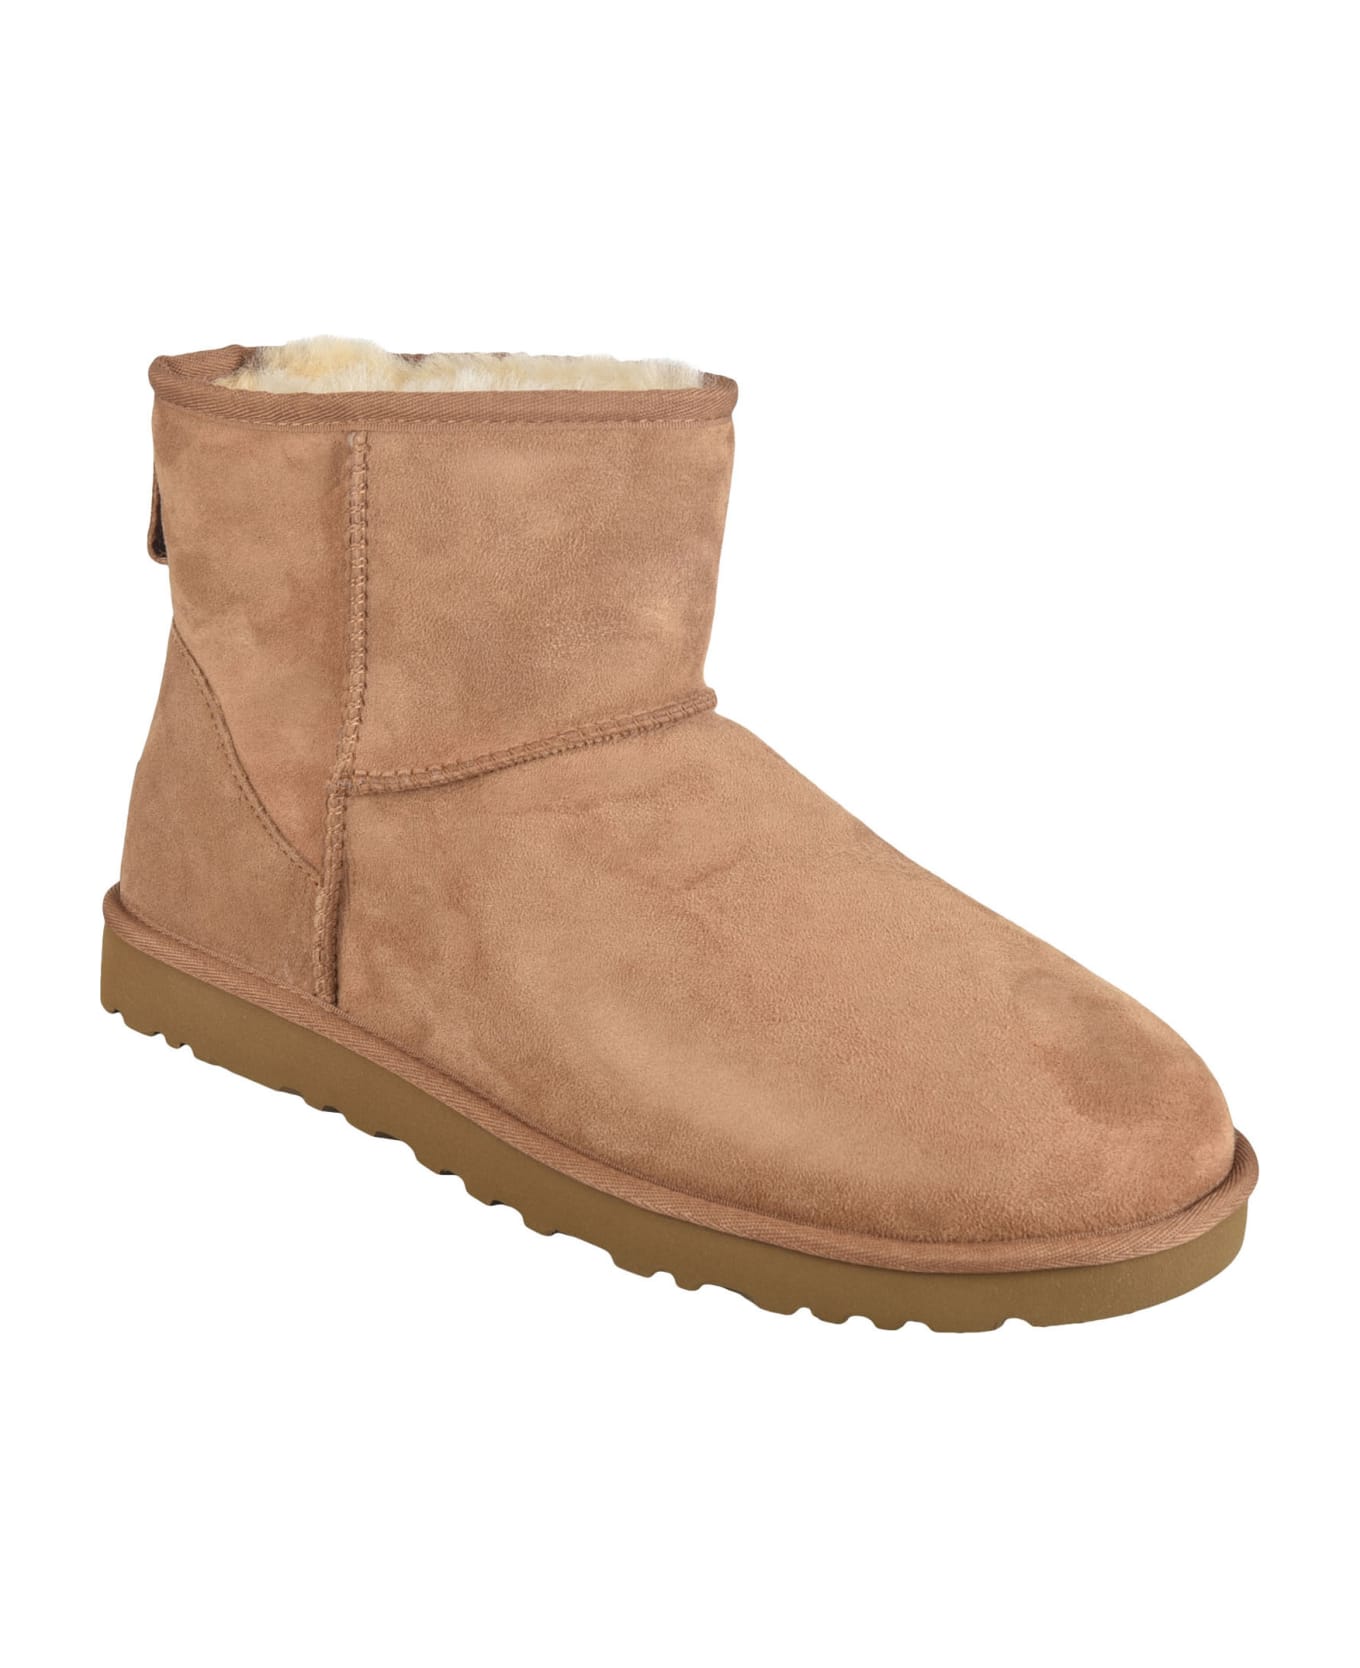 UGG Mini Classic Suede Ankle Boots - CHESTNUT